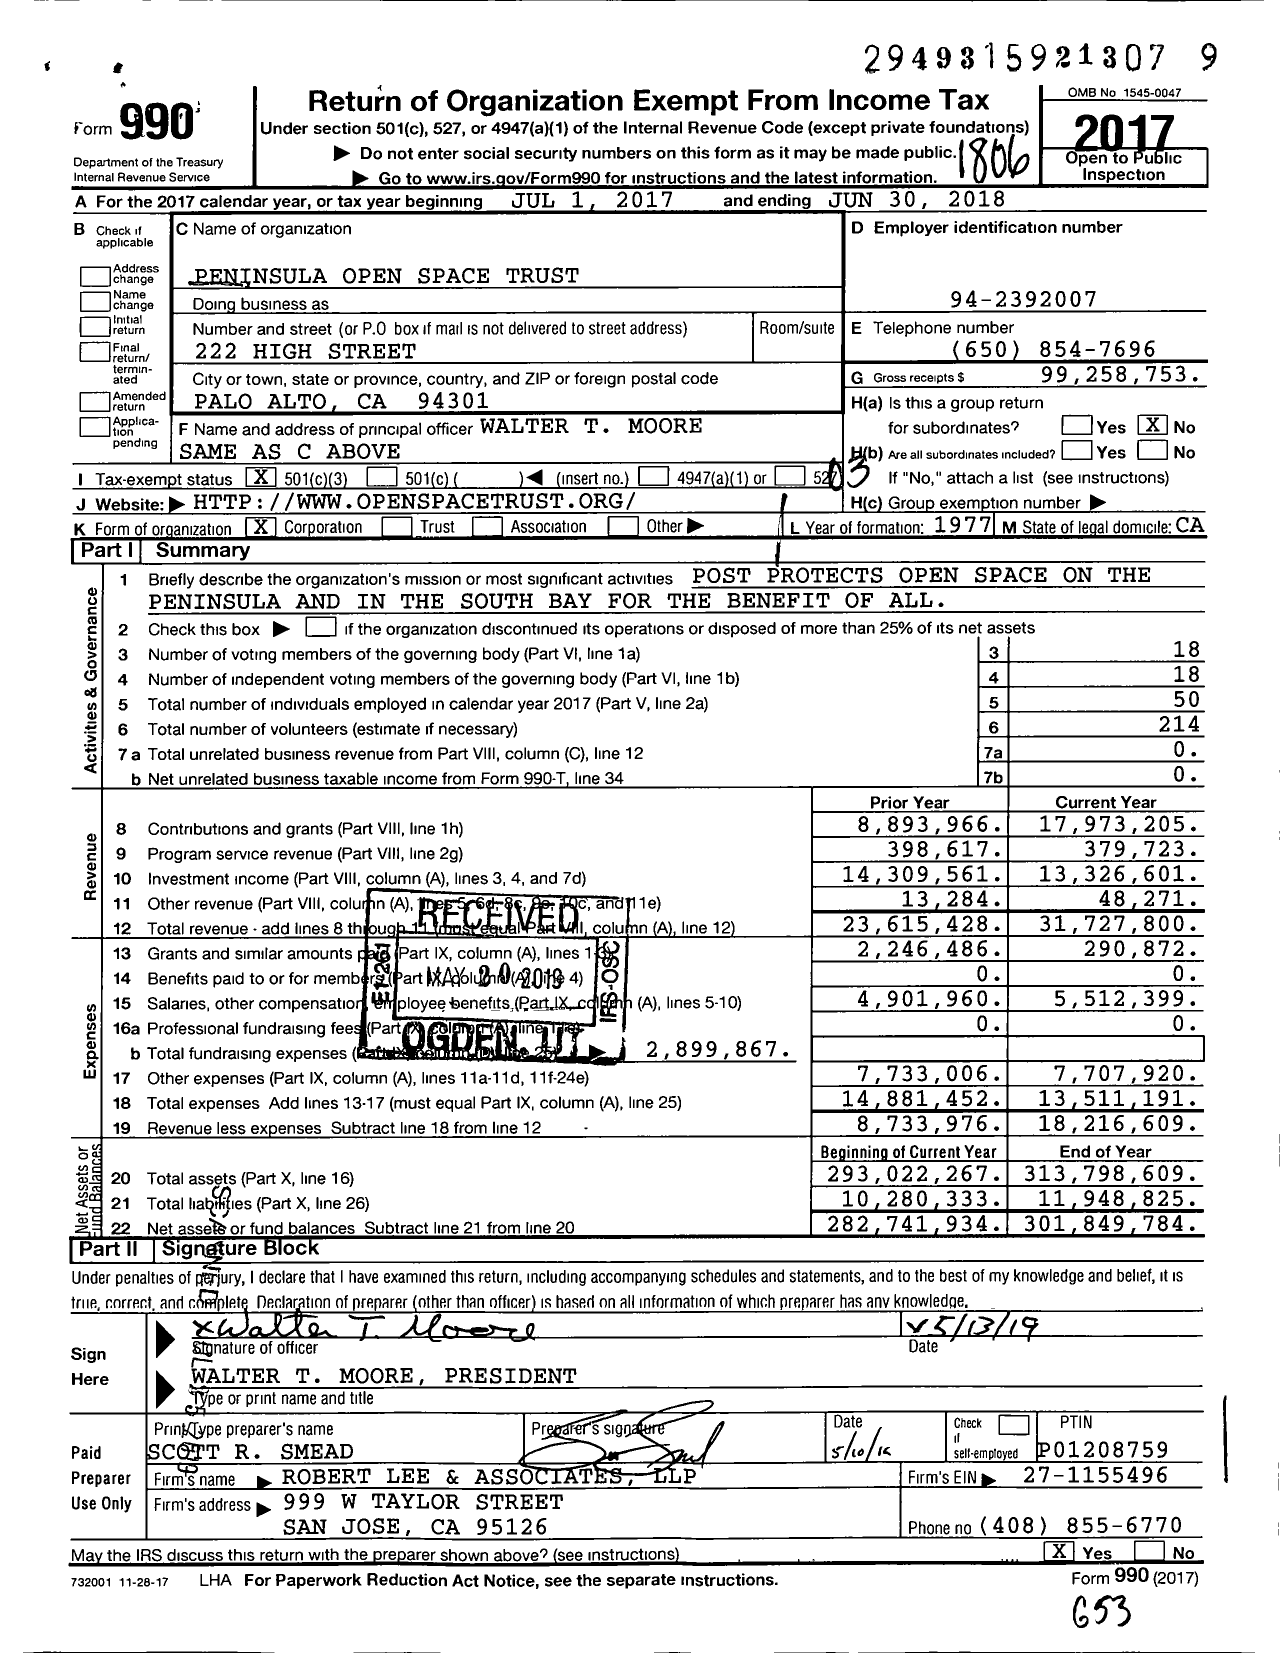 Image of first page of 2017 Form 990 for Peninsula Open Space Trust